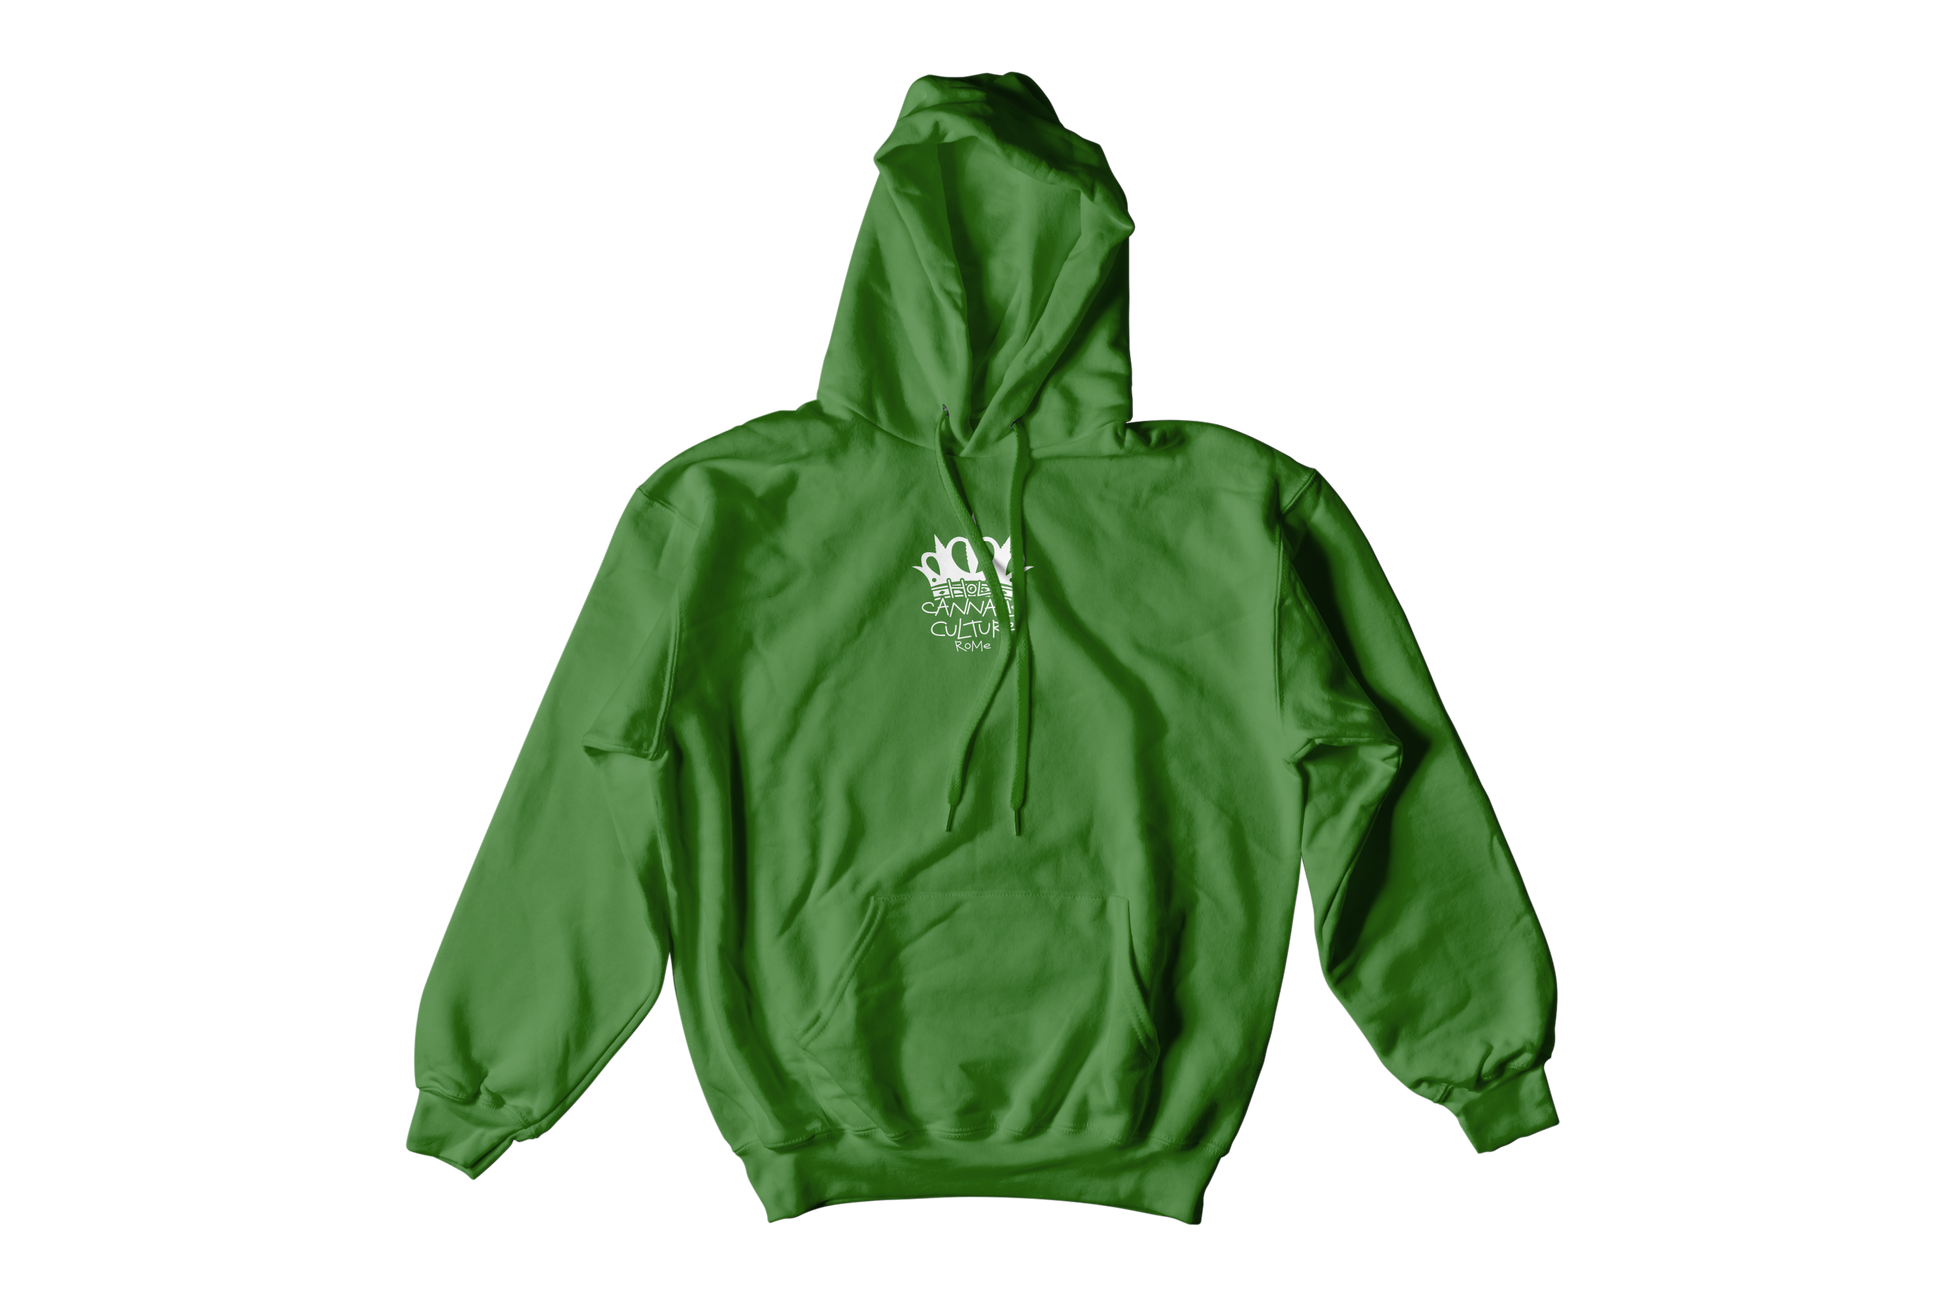 MamaMary HOLYCULTURE Hoodie Green #1 - mamamary